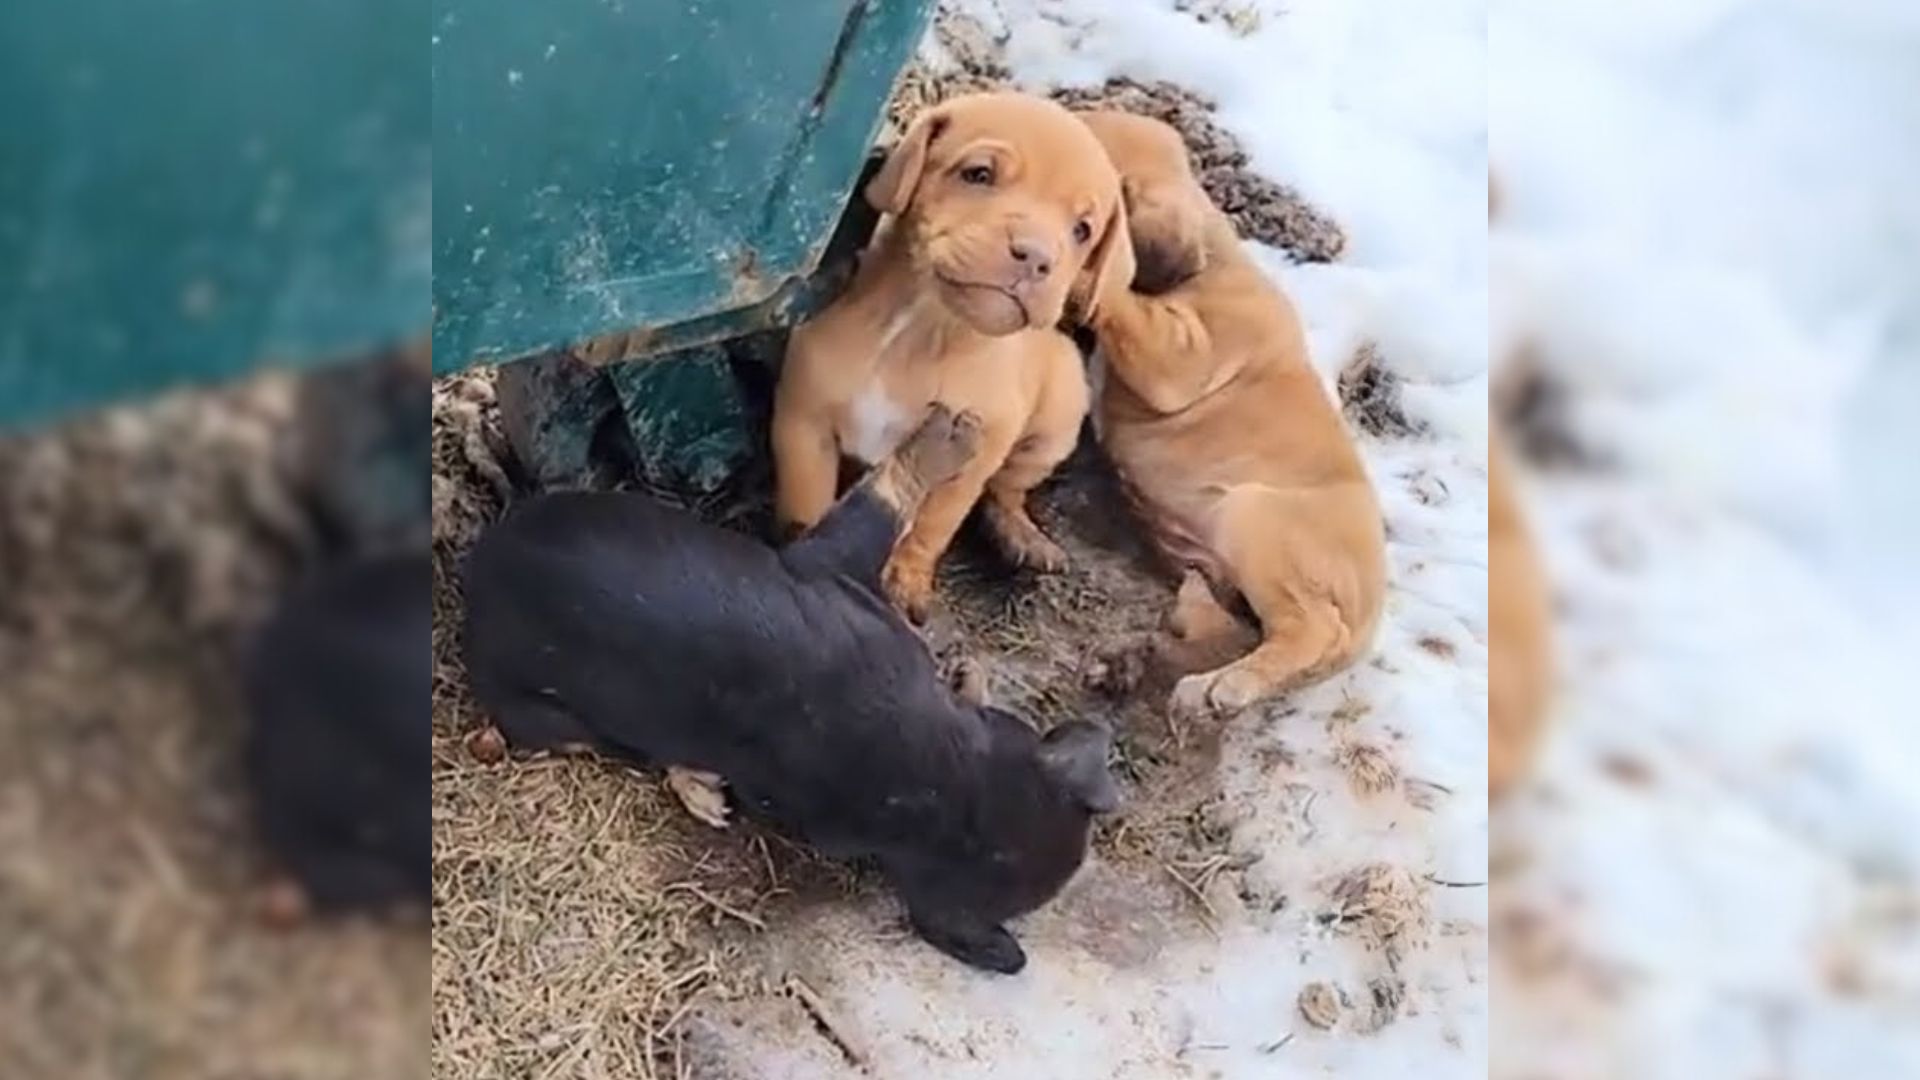 Rescuers Were Shocked To Find Puppies Freezing Behind A Dumpster, So They Rushed To Help